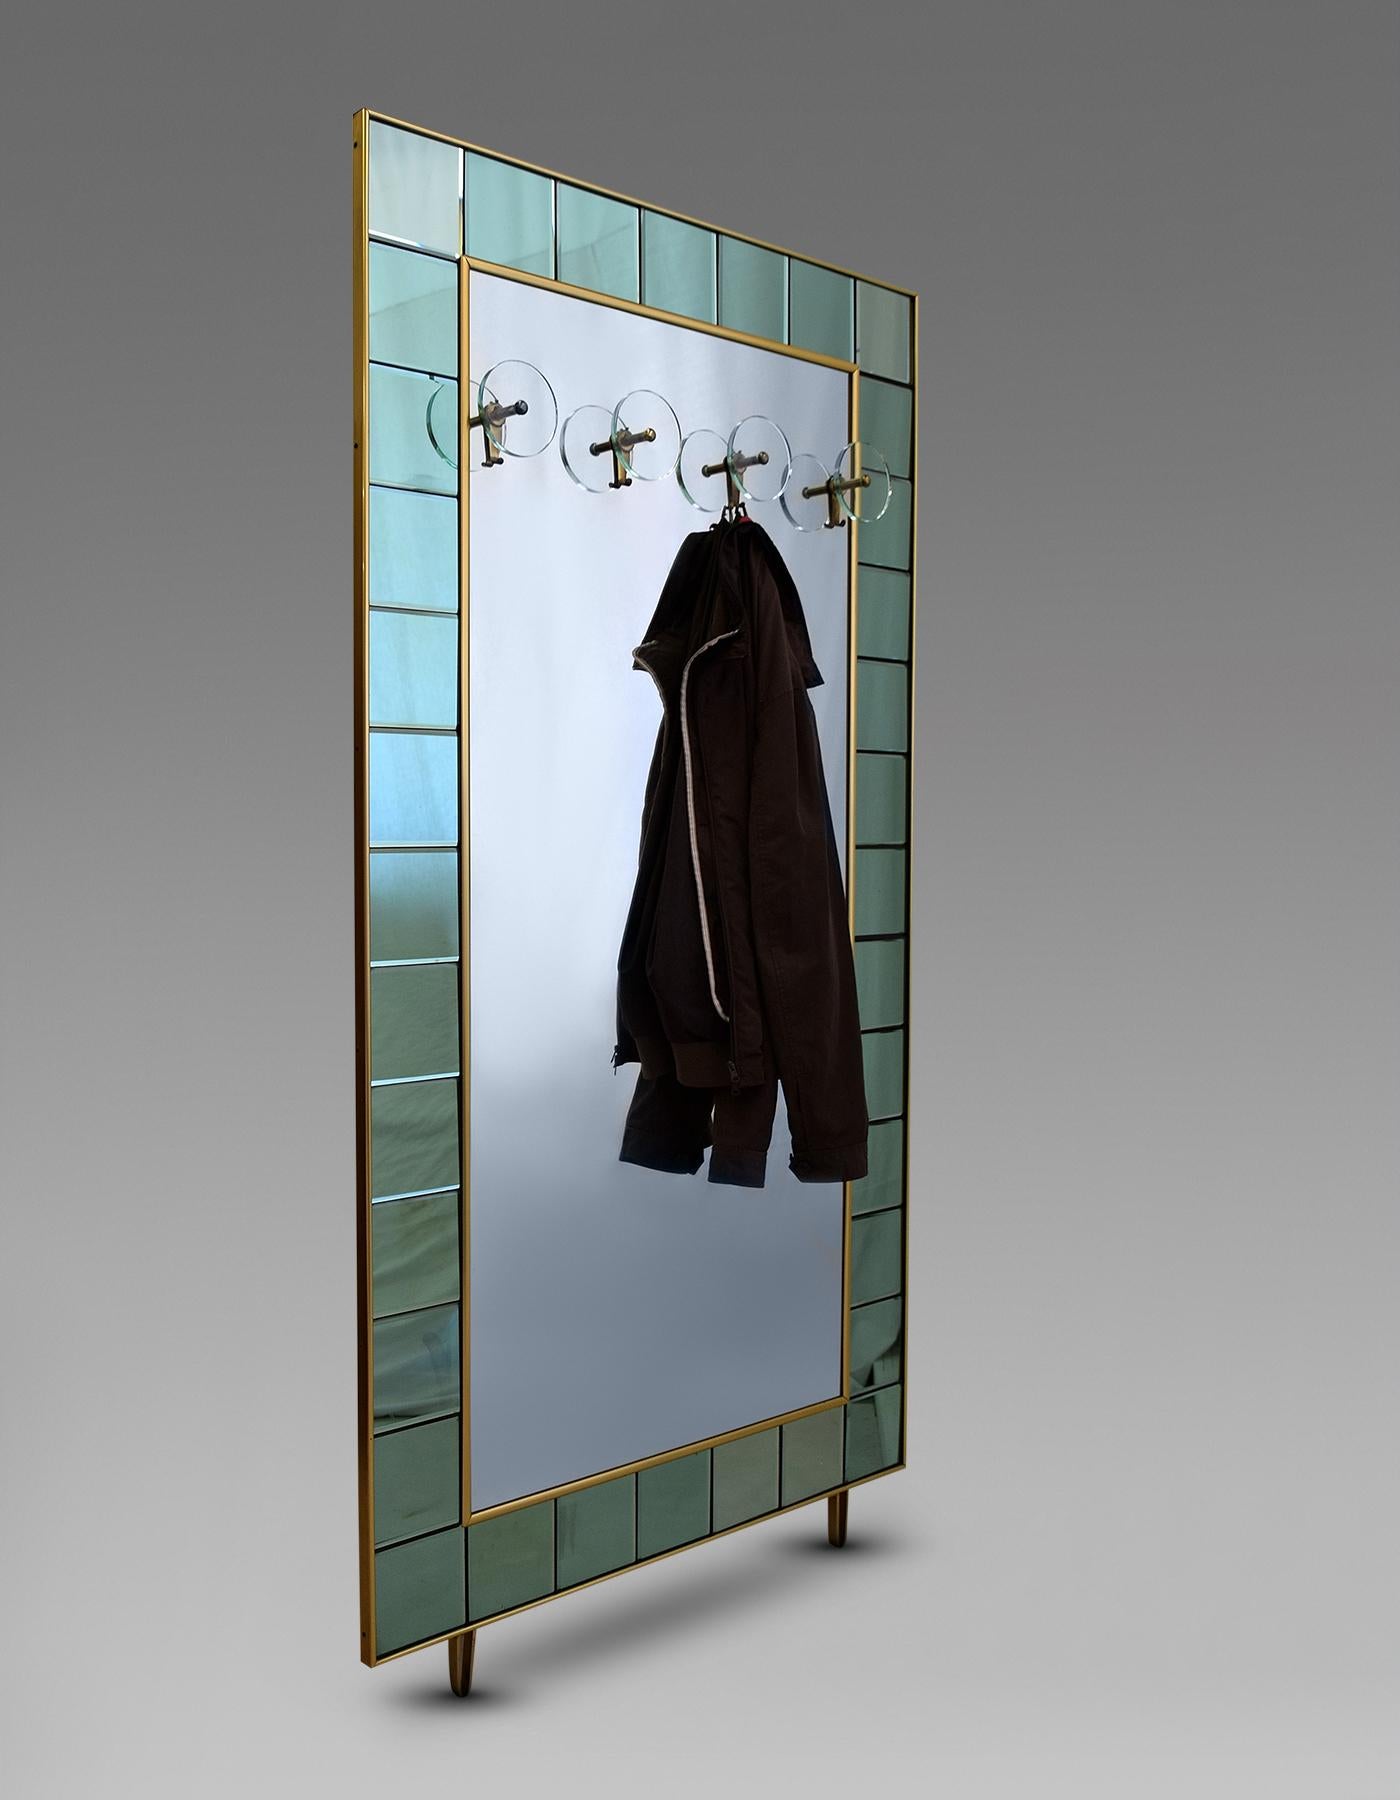 Stylish and elegant Italian mid century hallway entrance mirror / coat rack in great vintage condition.
This beautiful piece will be shipped insured overseas in a custom made wooden crate. Cost of transport is crate included.